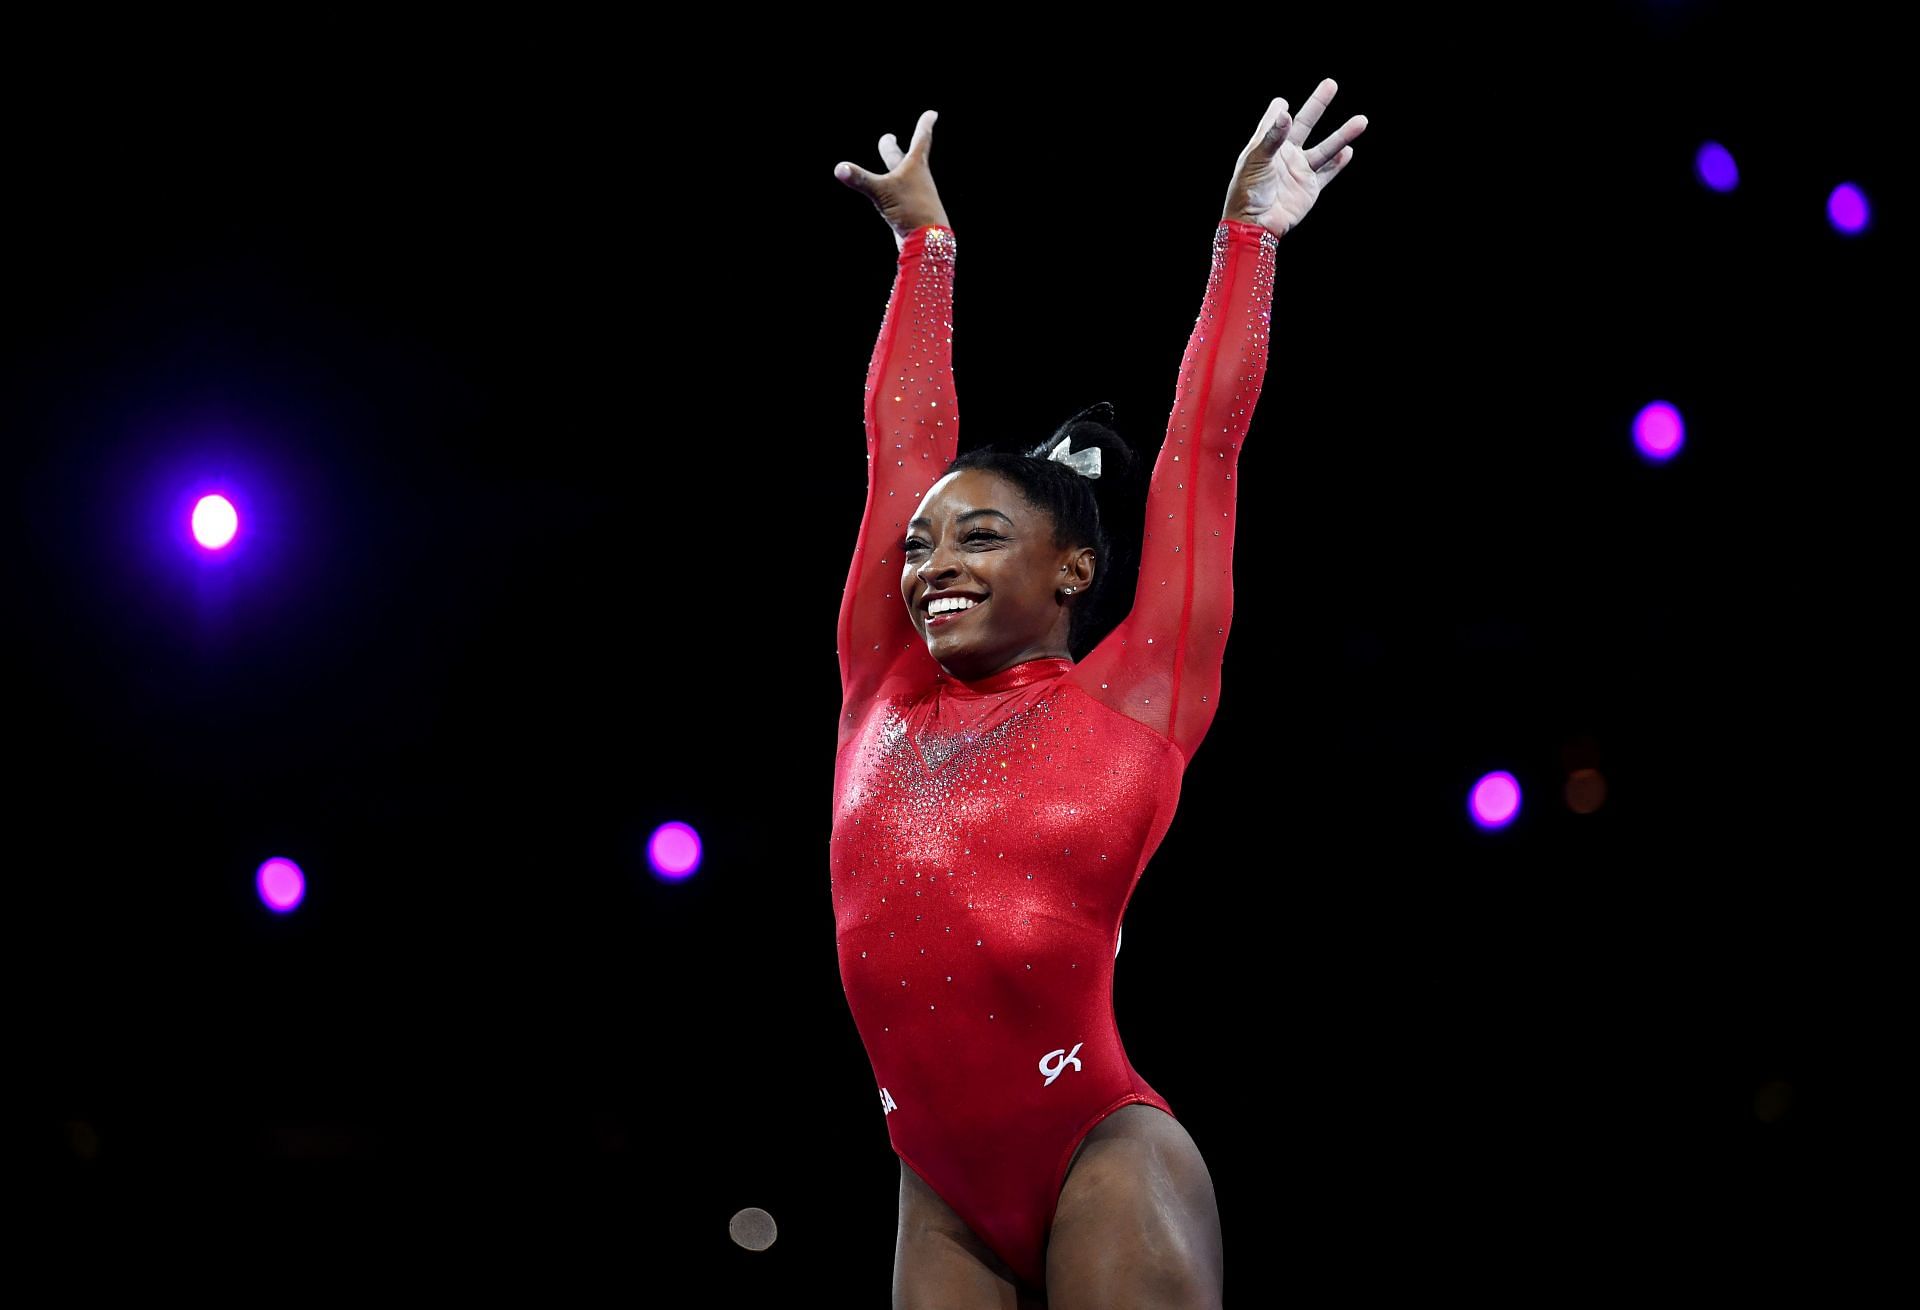 Simone Biles on Day Nine of the 49th FIG Artistic Gymnastics World Championships in 2019 (Image via Getty)